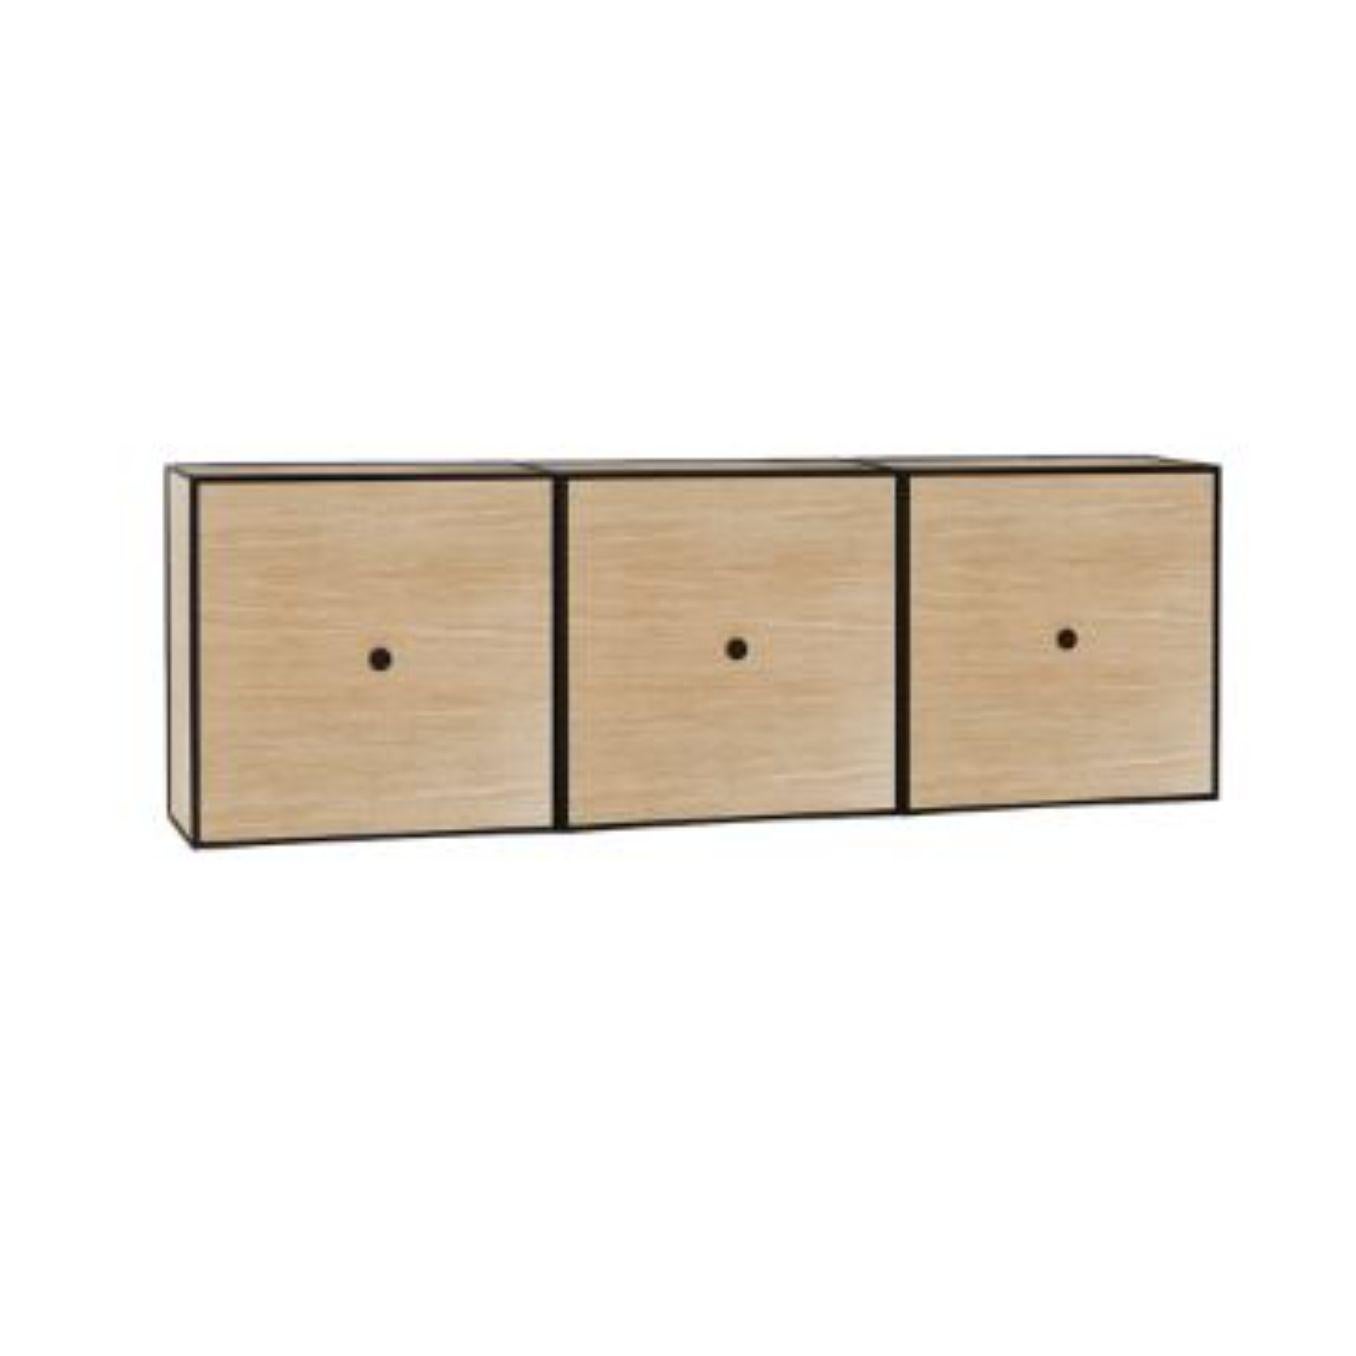 42 Oak frame view box by Lassen
Dimensions: D 126 x W 21 x H 42 cm 
Materials: Finér, Melamin, Melamine, Metal, Veneer, Oak
Also available in different colors and dimensions. 
Weight: 22.80 Kg

By Lassen is a Danish design brand focused on